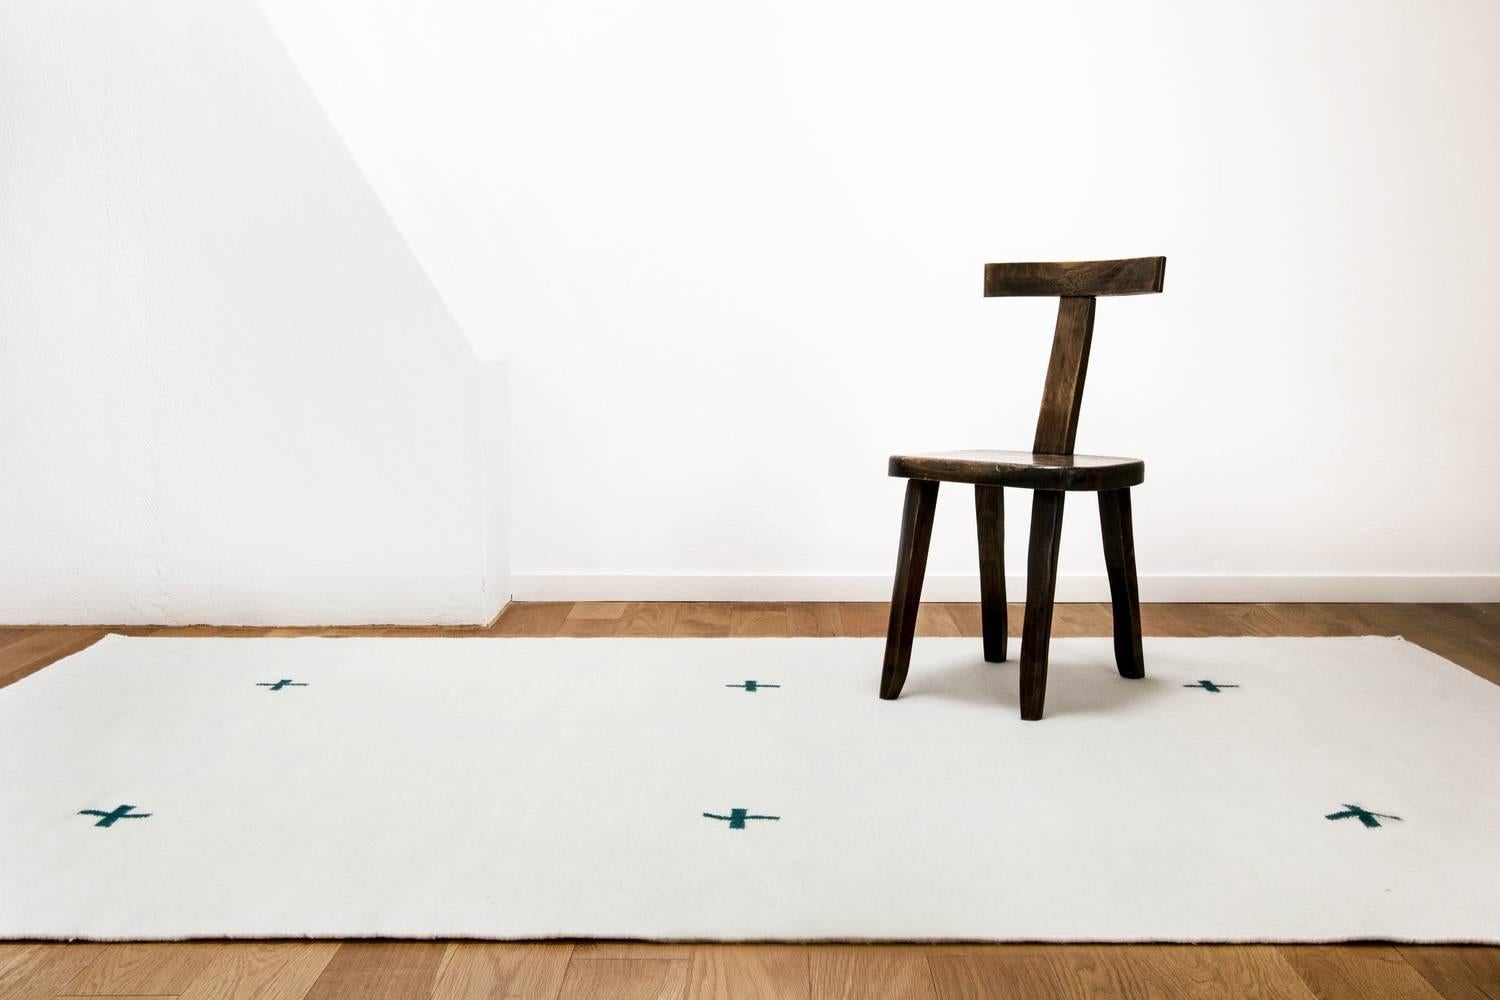 Hand-Woven Modern Dhurrie/Kilim Rug in Scandinavian Design, Available in many sizes.